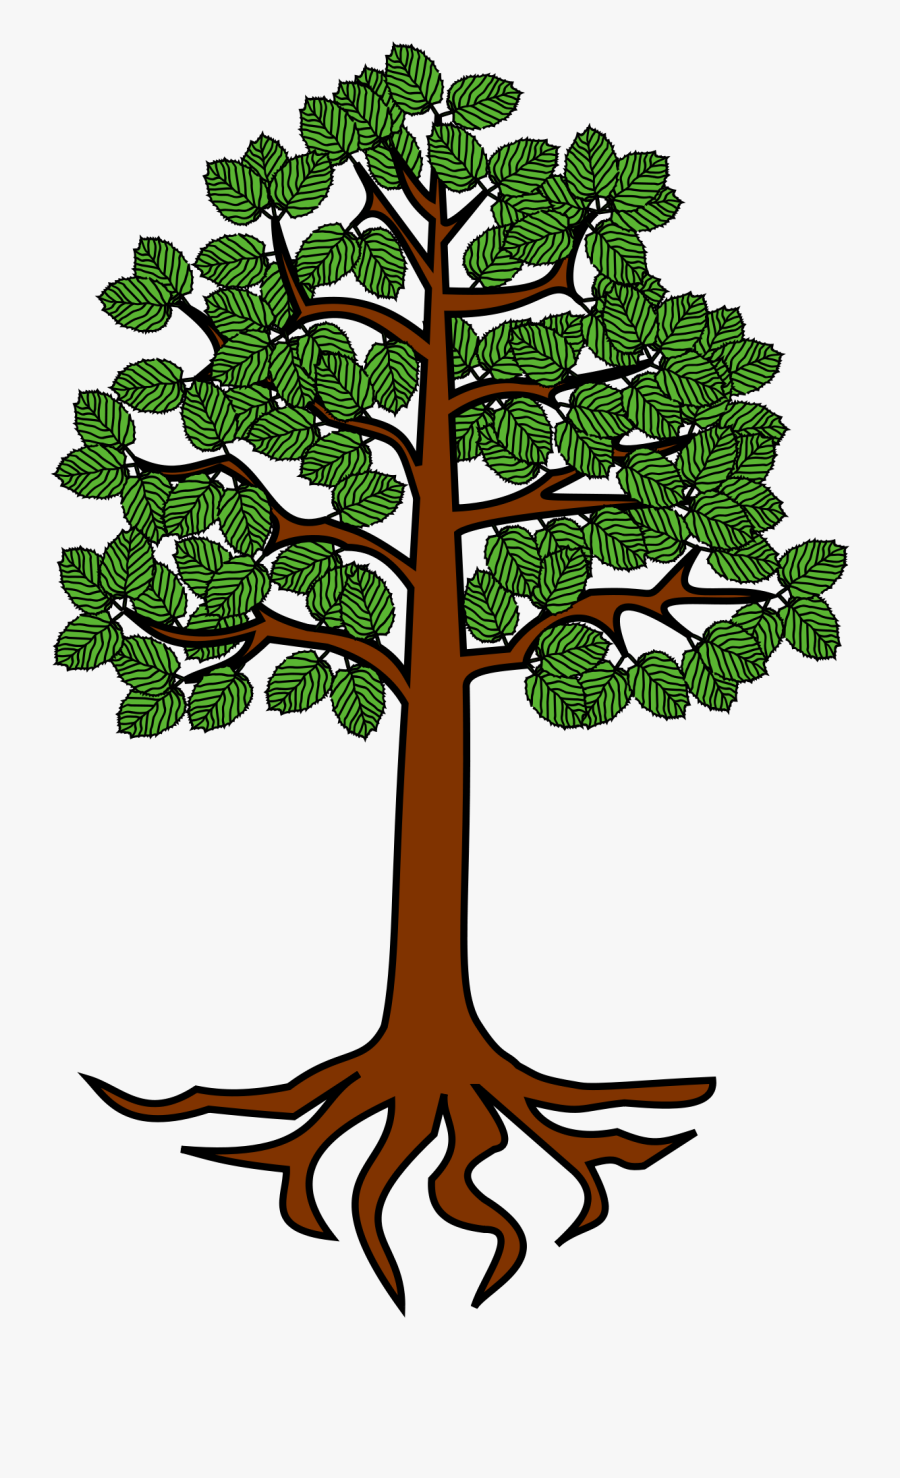 Roots Clipart Cartoon Tree - Tree With Roots Cartoon, Transparent Clipart